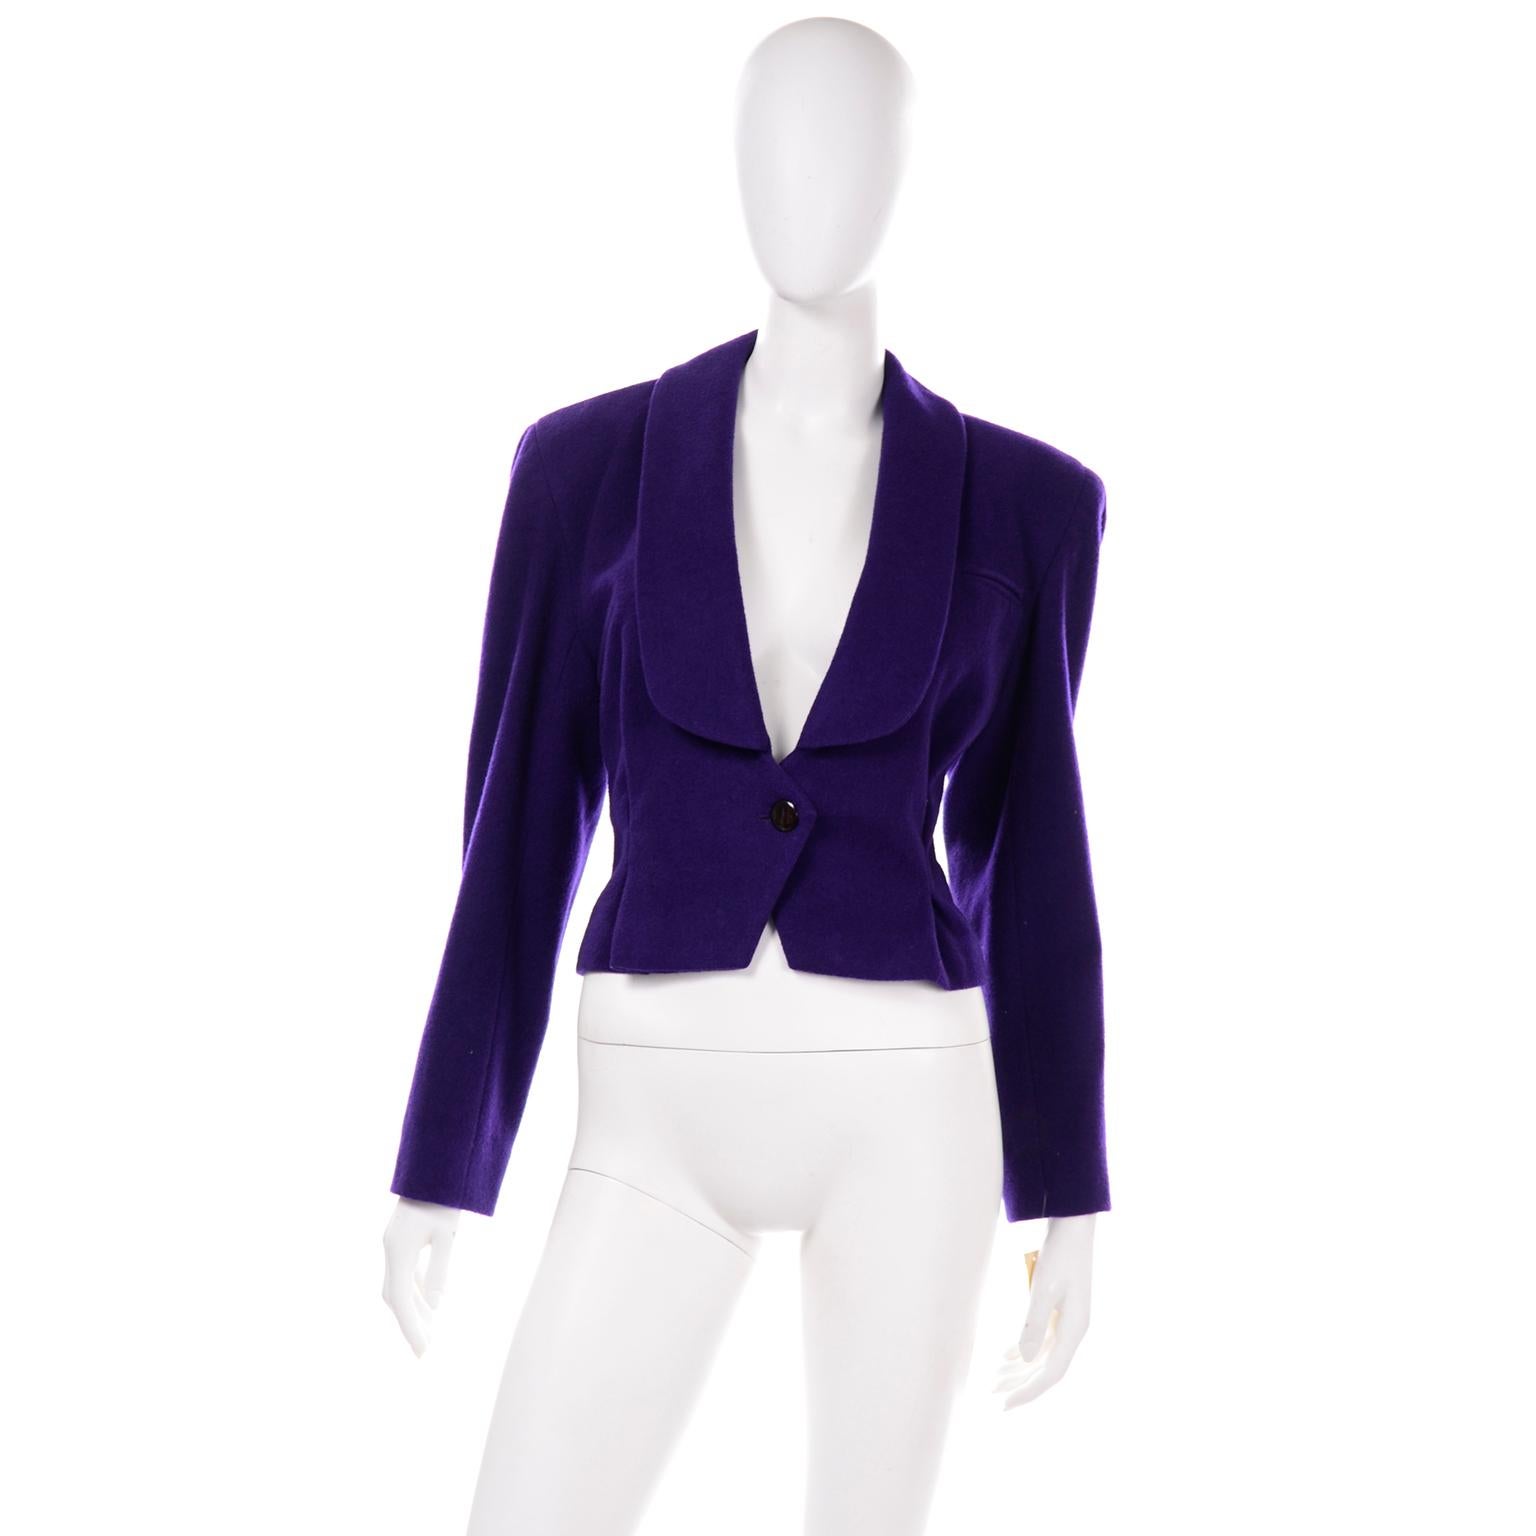 This Norma Walters cropped wool jacket is so fabulous! The wool + cashmere blend is in a rich purple and this piece is sure to elevate any outfit. There is a front button closure and one small faux breast pocket. There are two darts on the front of